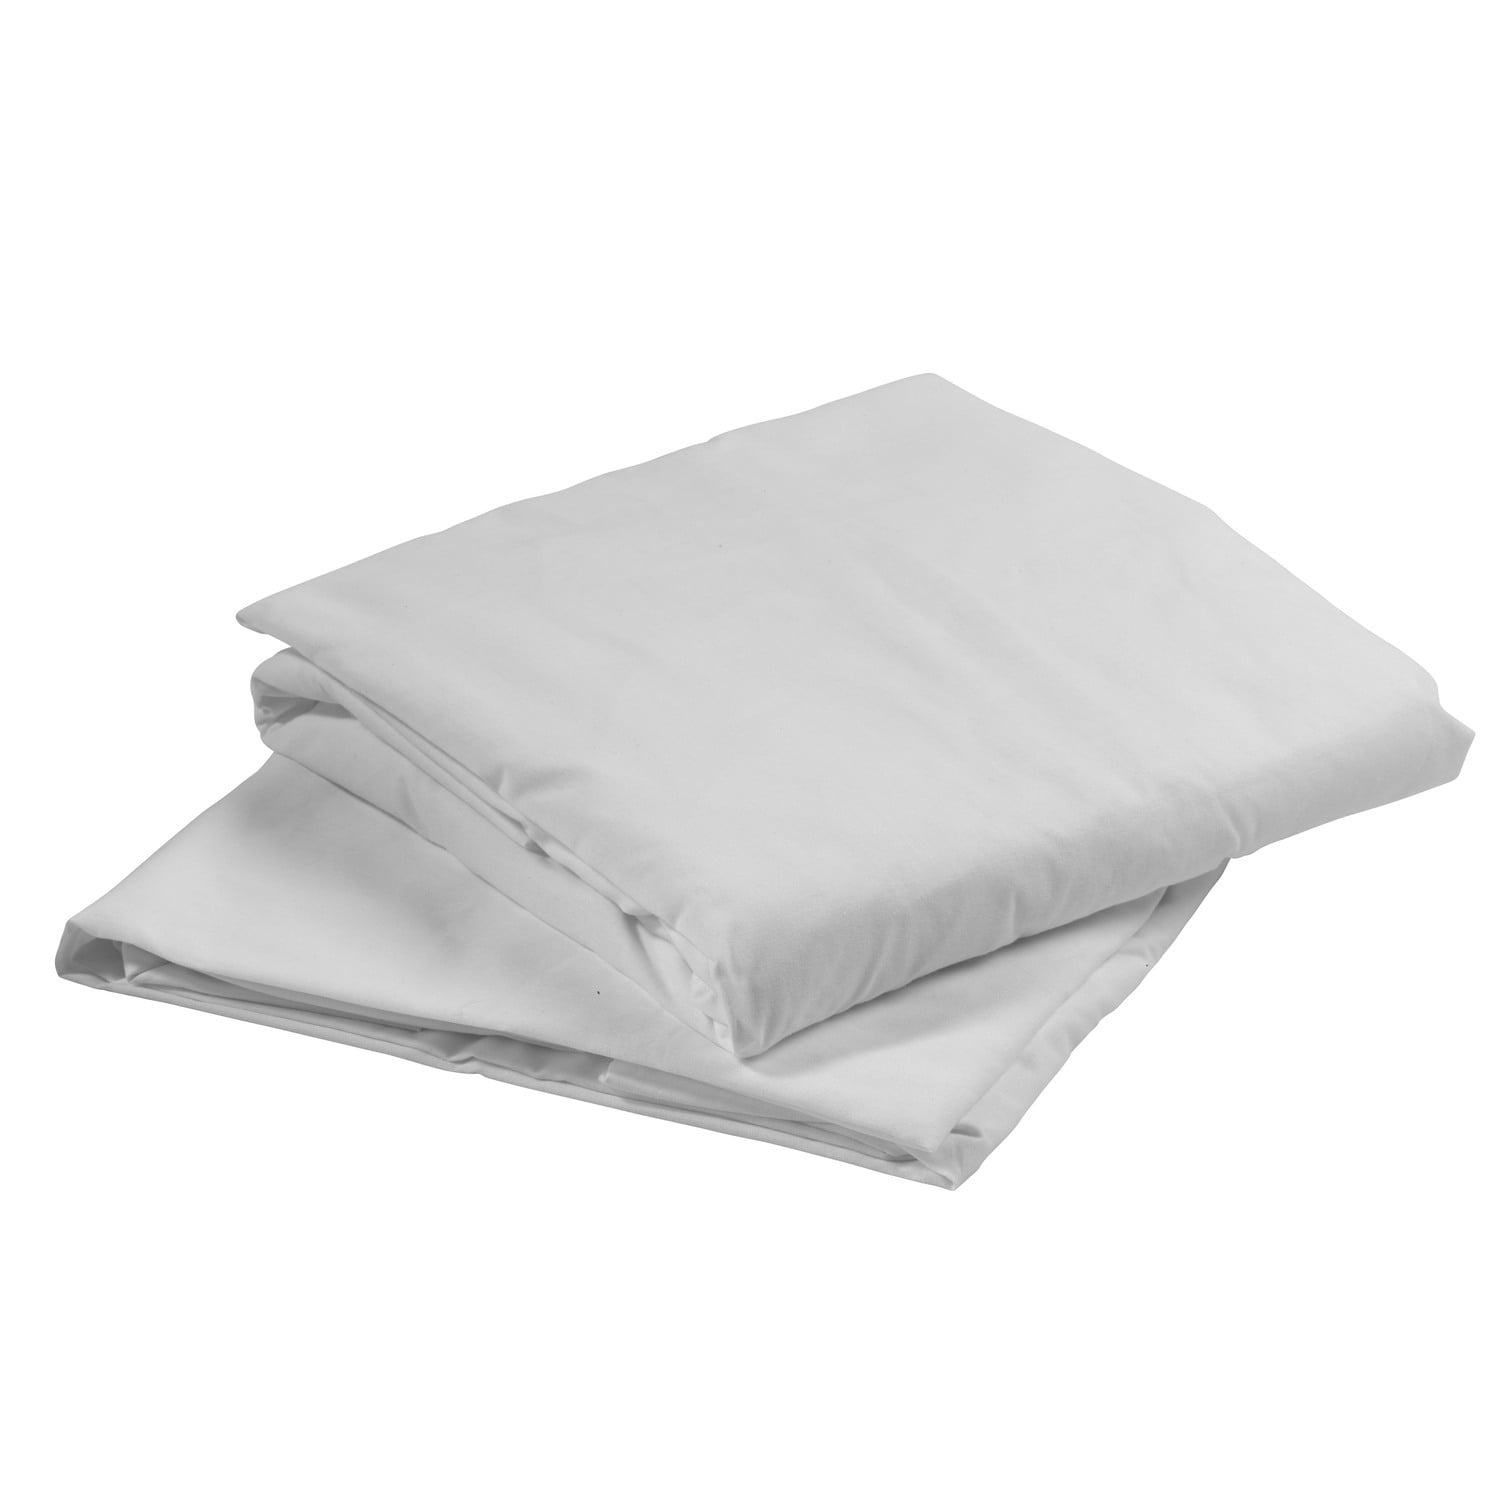 5 new premium white contour twin knitted fitted sheet hospital bed 36x84x16 30oz 